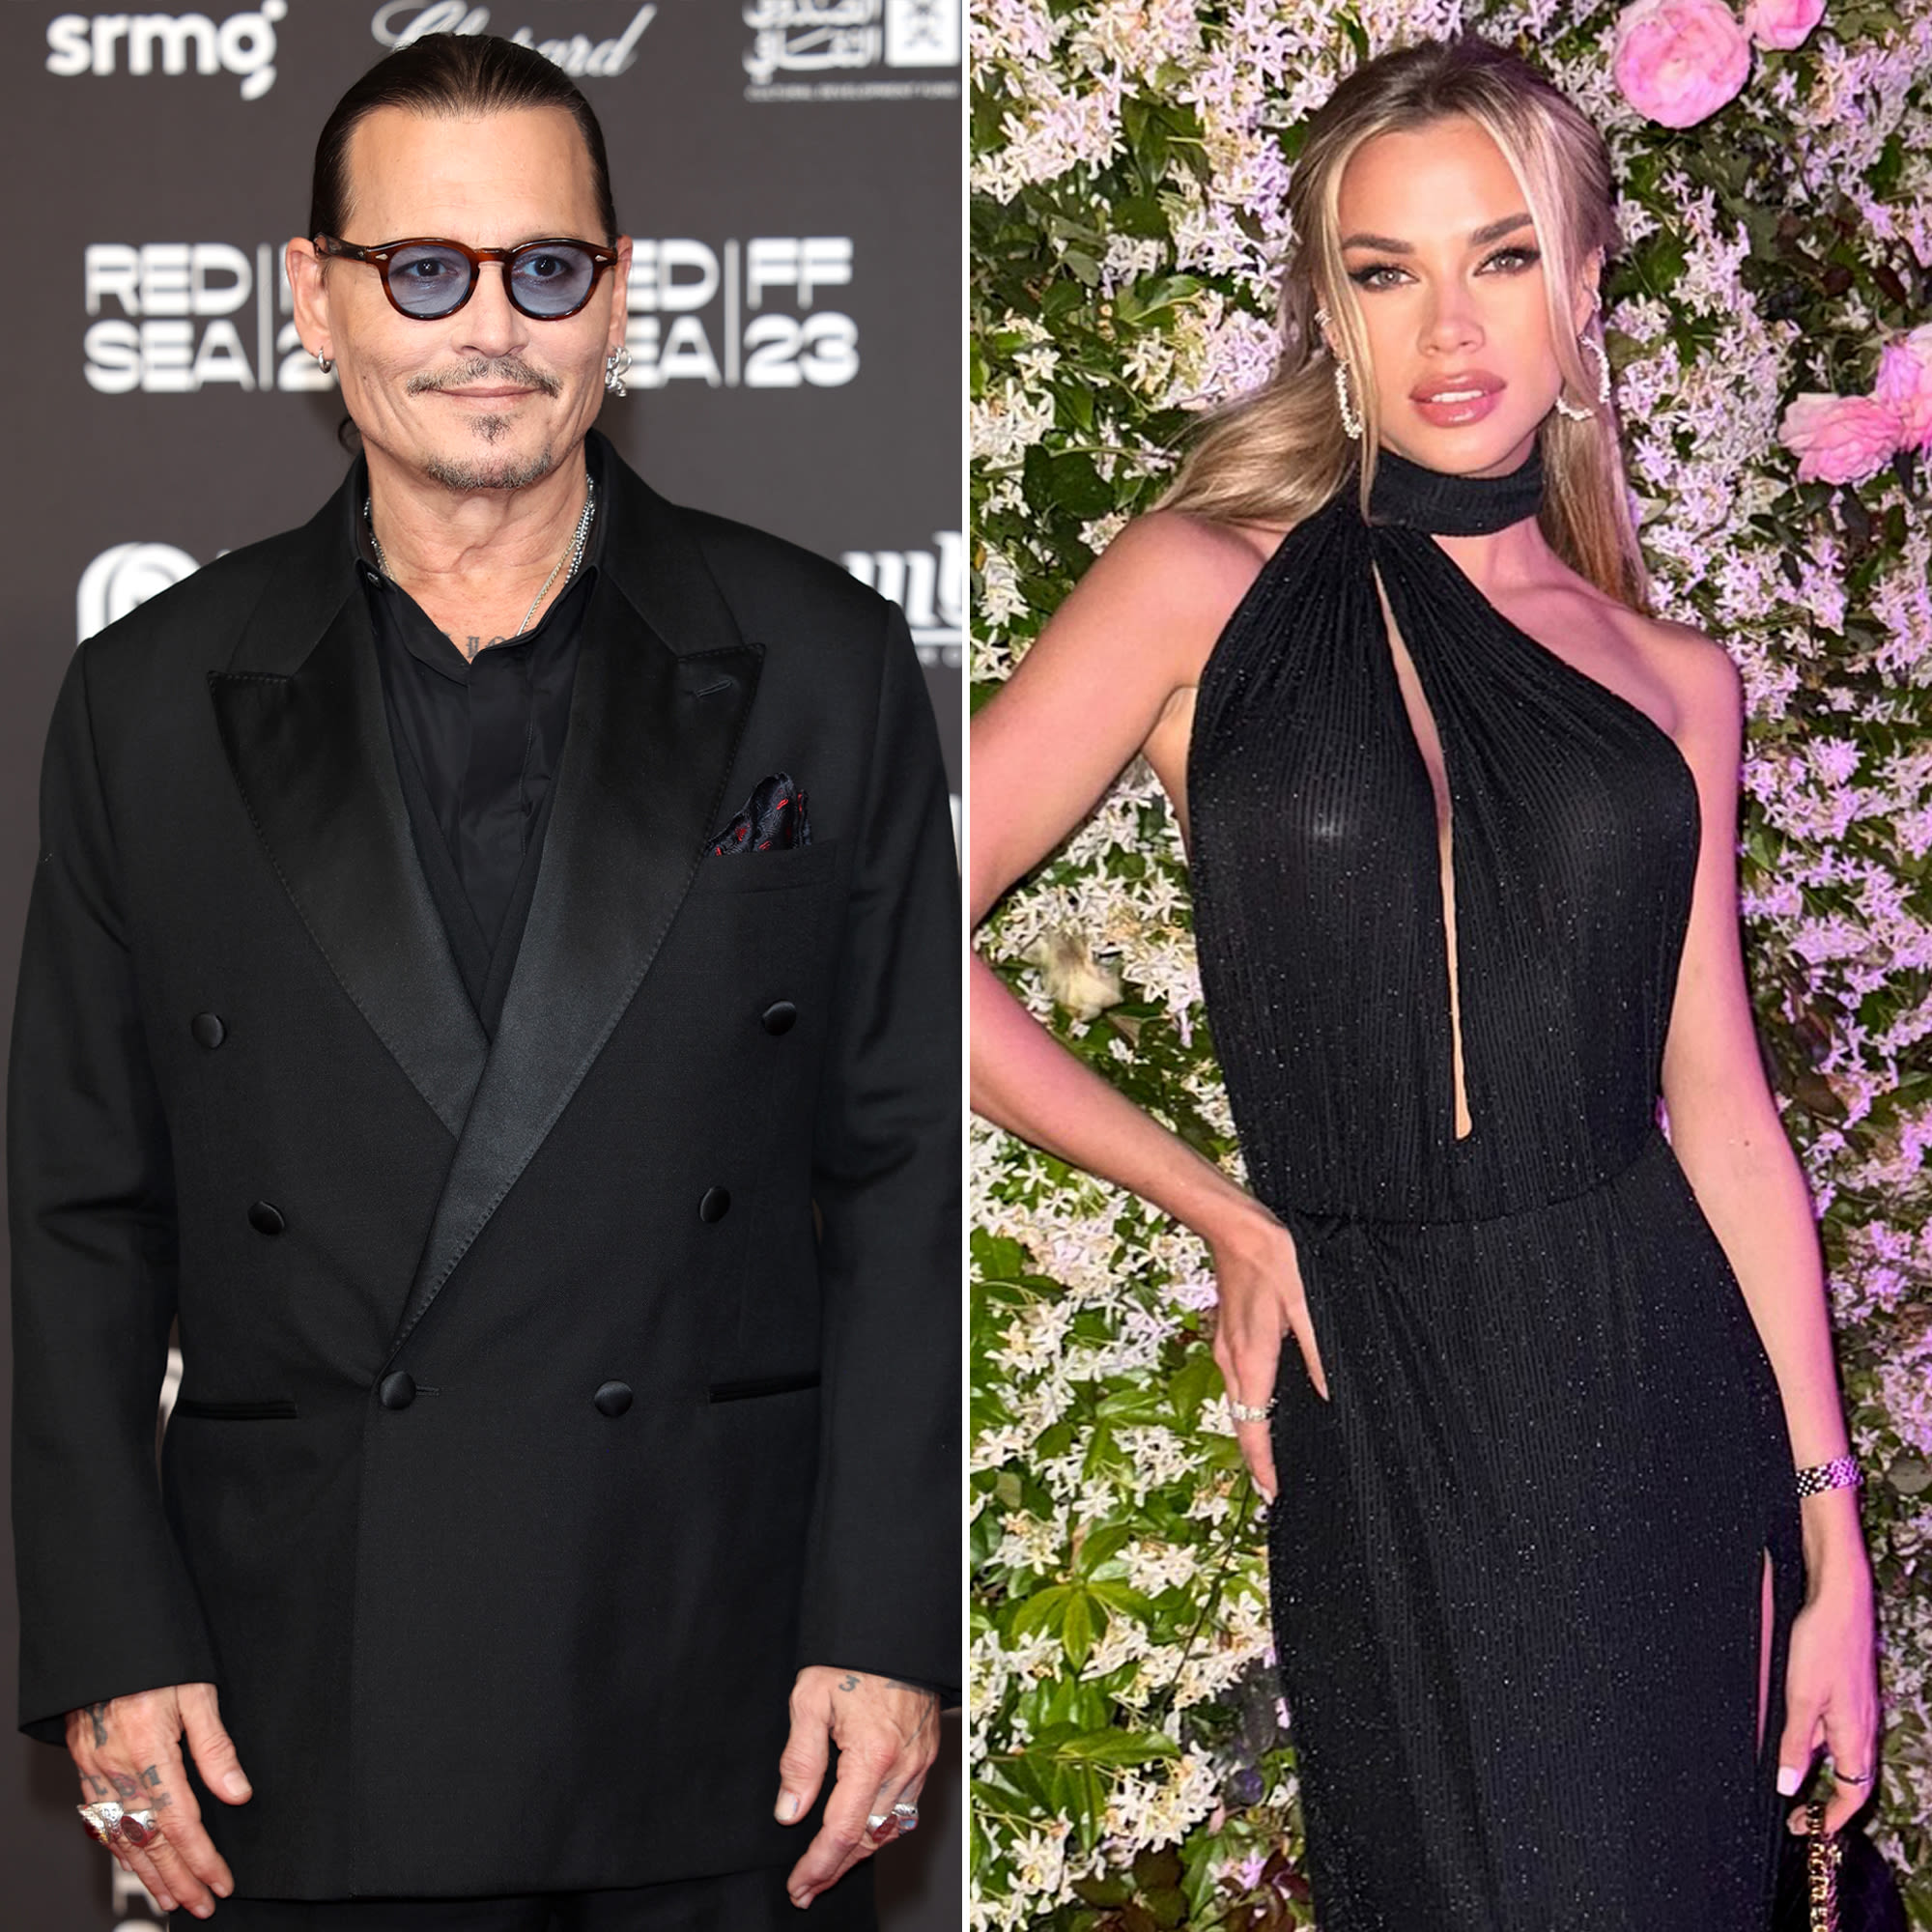 Johnny Depp and Yulia Vlasova’s Relationship Is ‘Very Casual’: ‘They See Each Other Here and There’